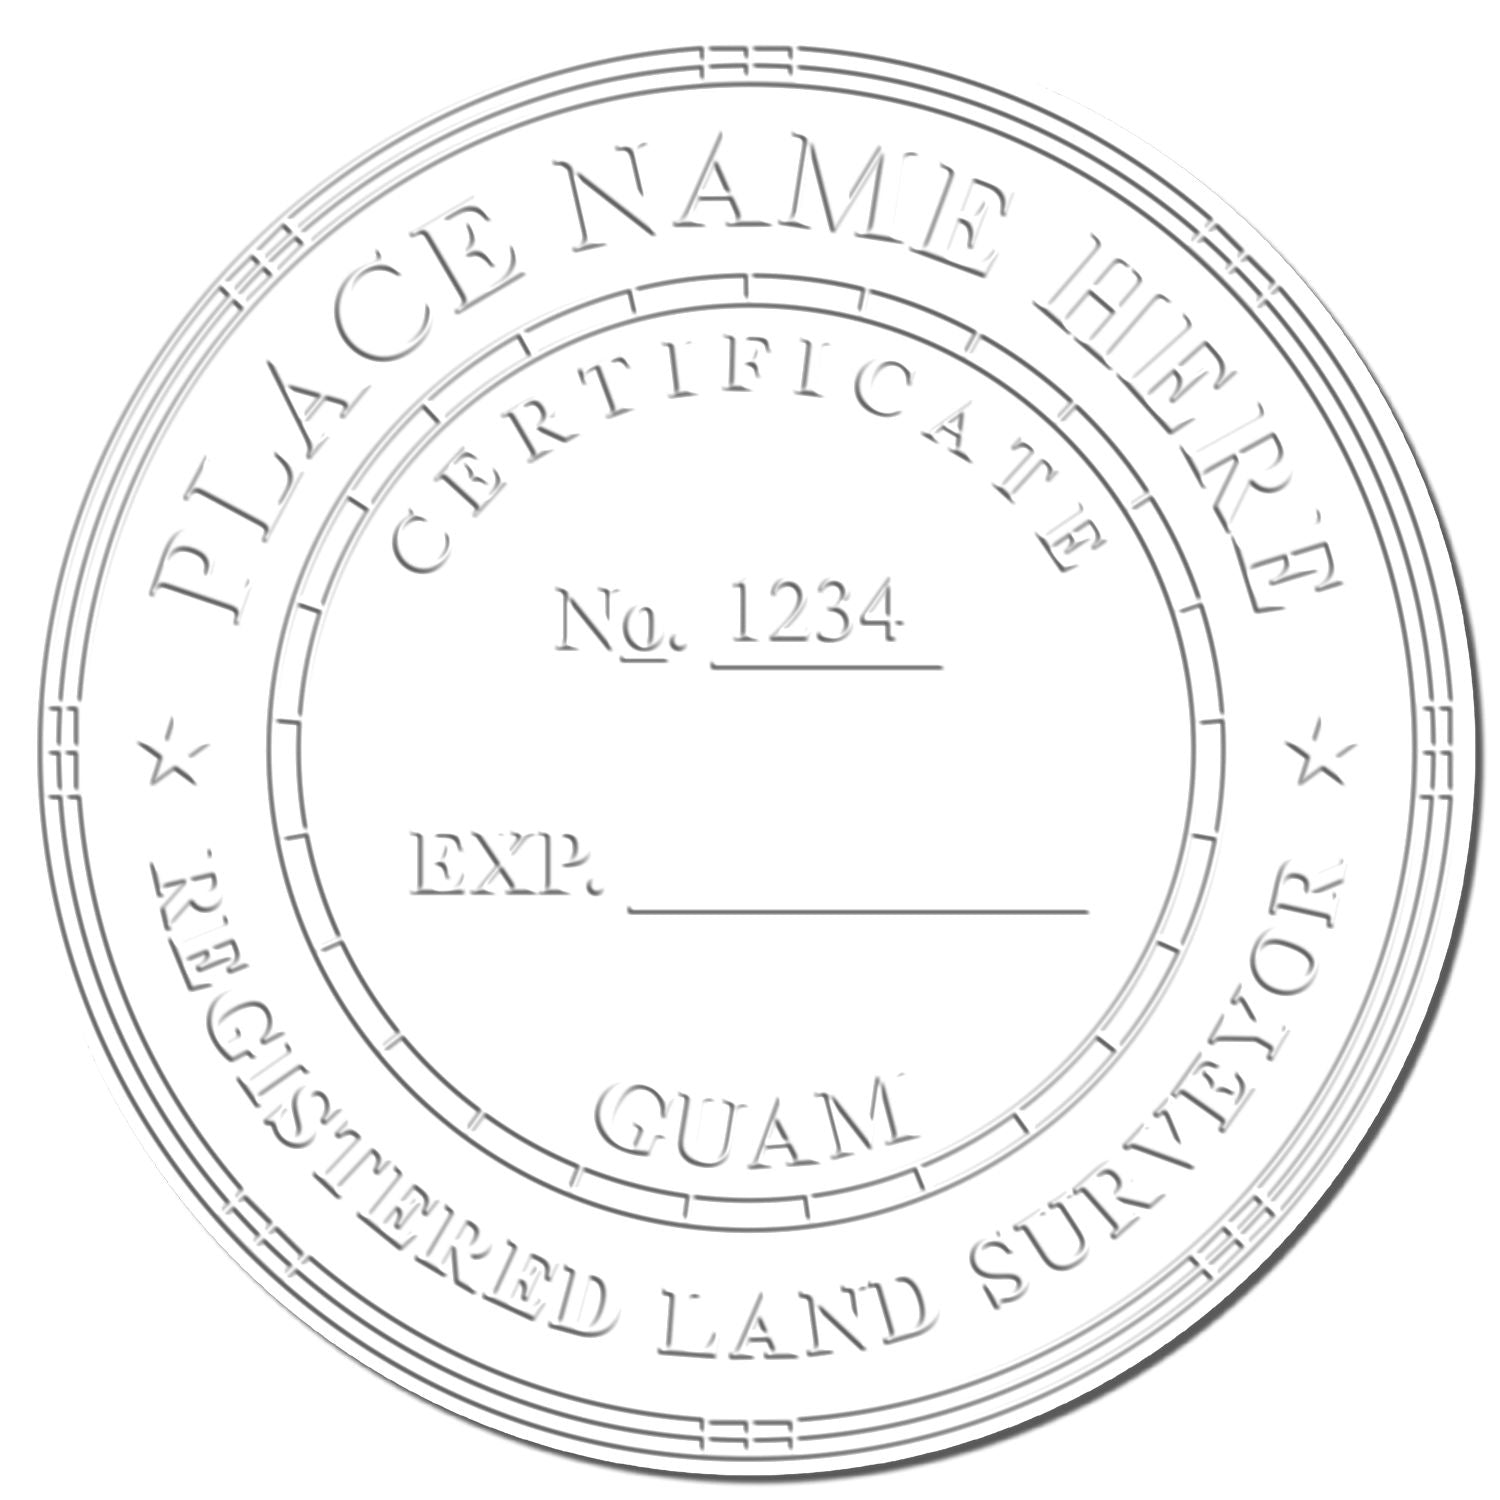 The main image for the Long Reach Guam Land Surveyor Seal depicting a sample of the imprint and electronic files